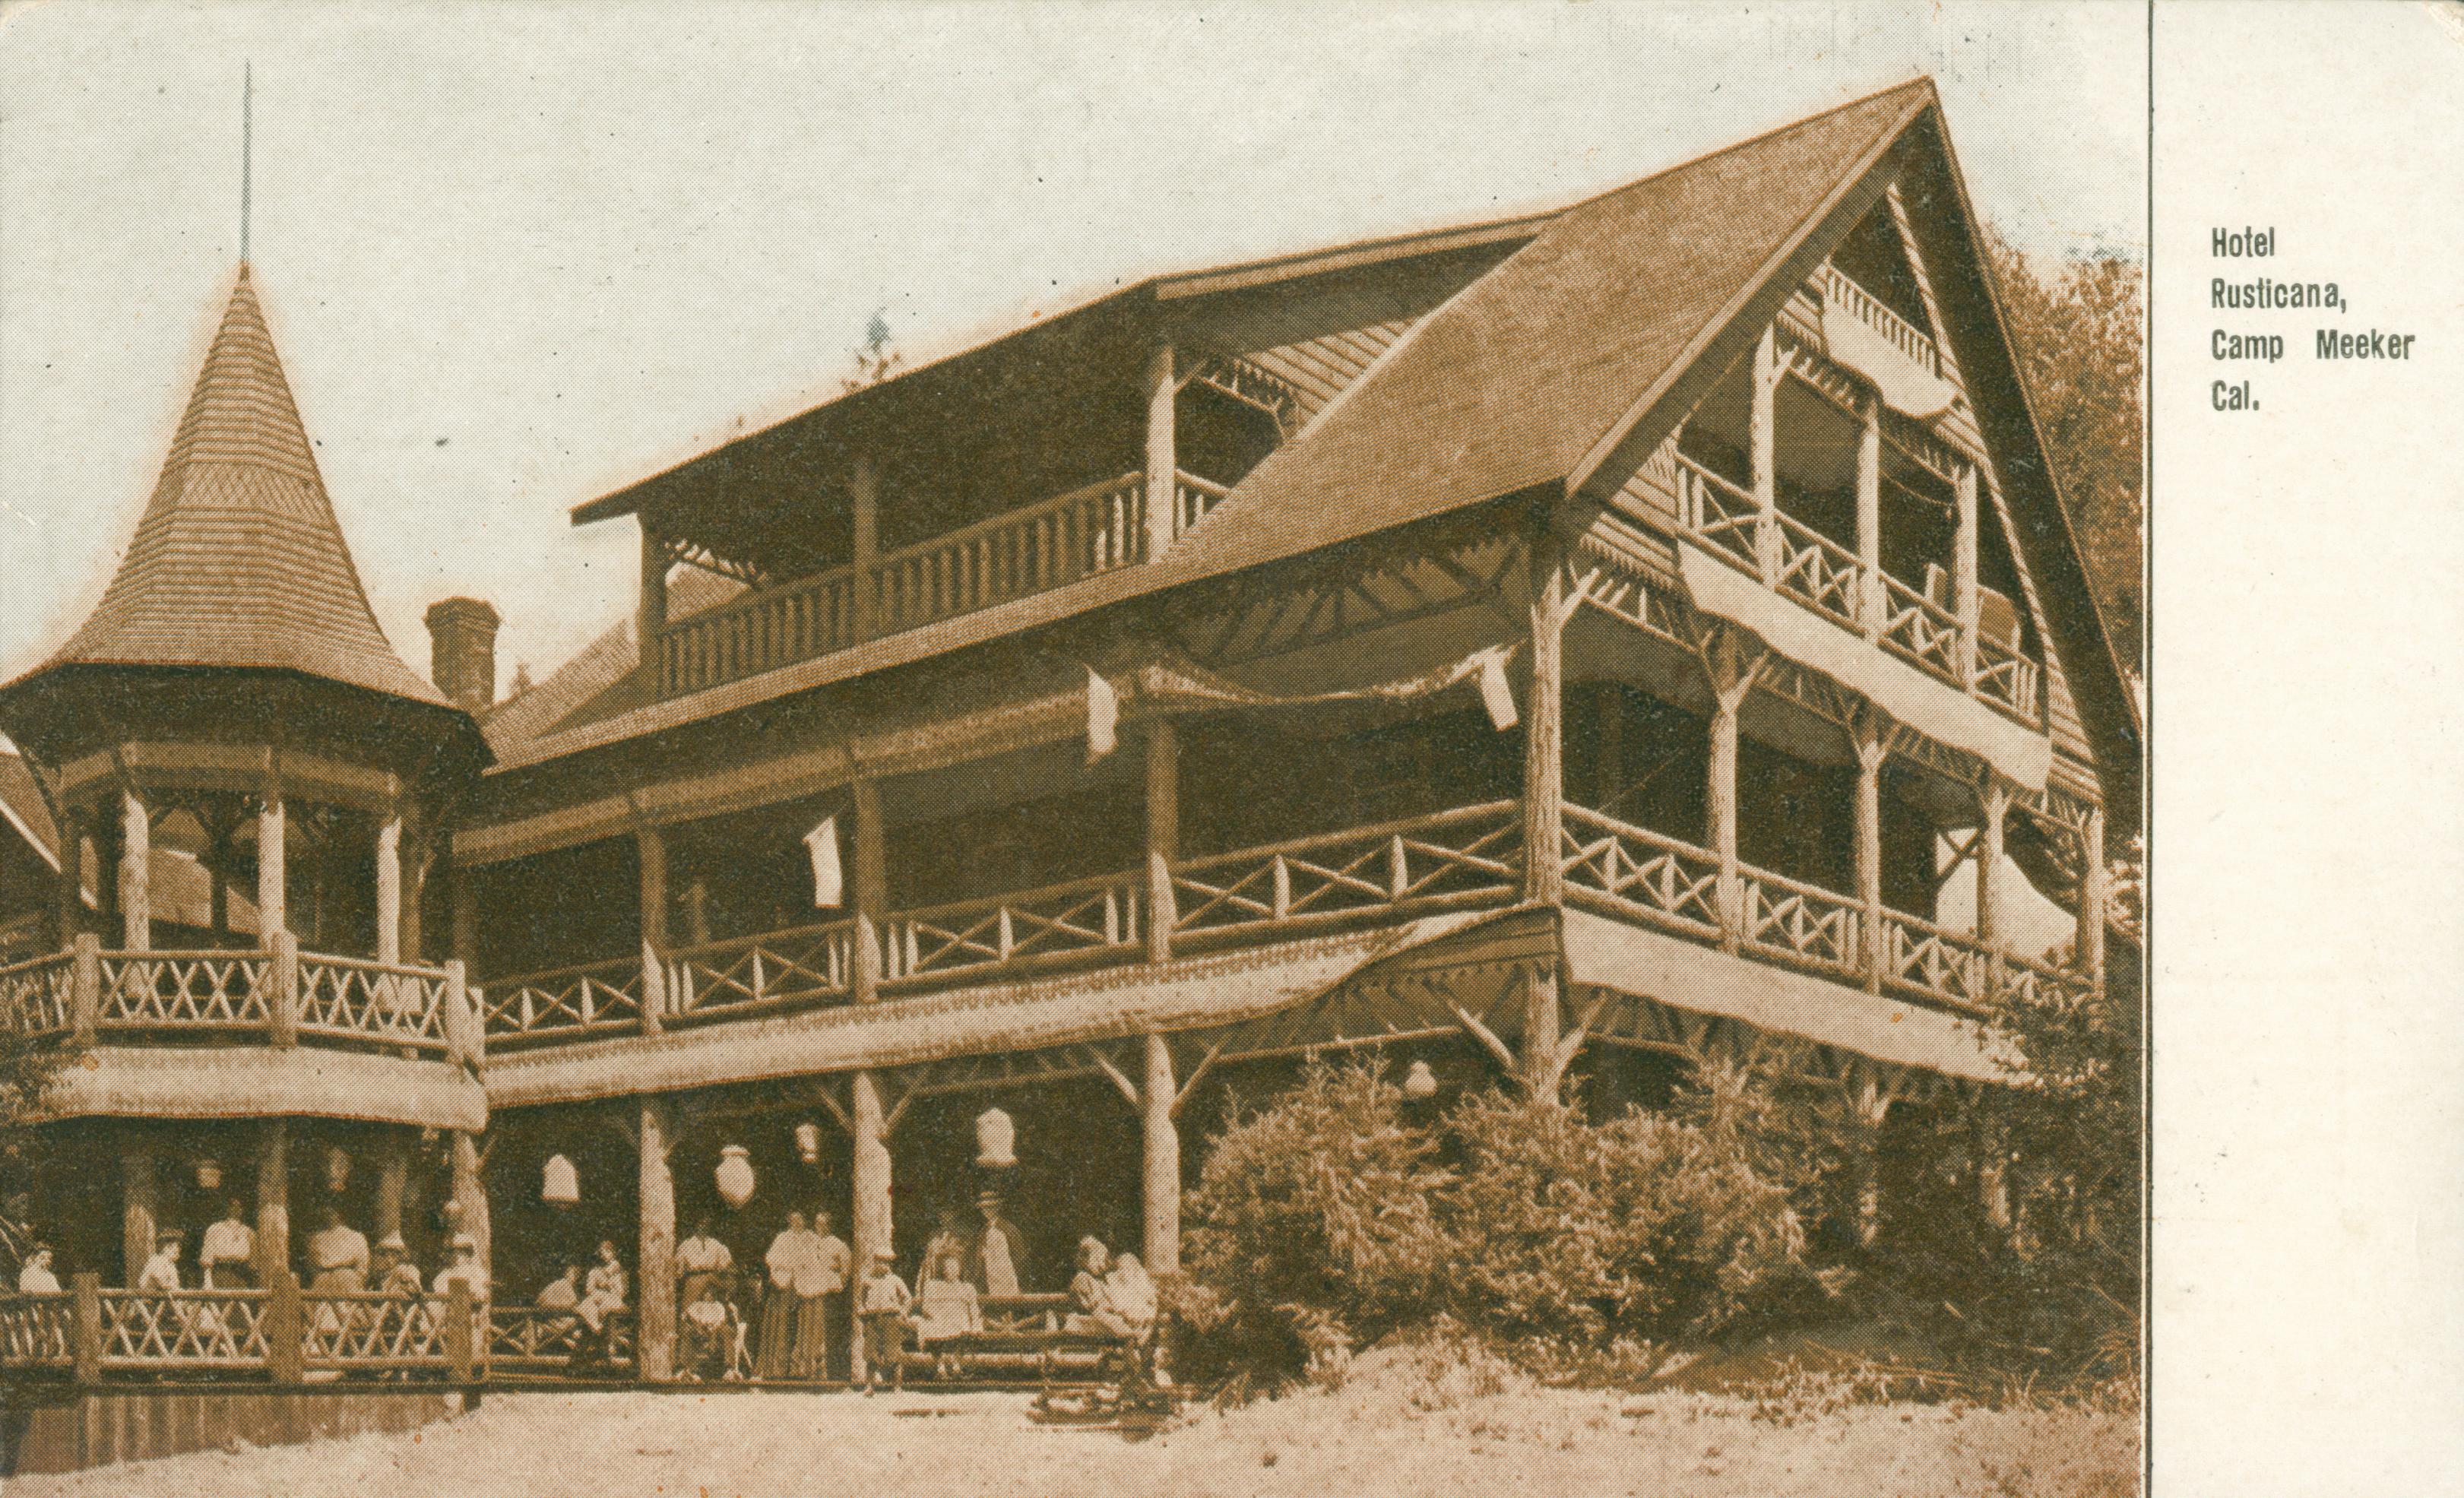 Shows a corner view of Hotel Rusticana with several visitors standing on the porch